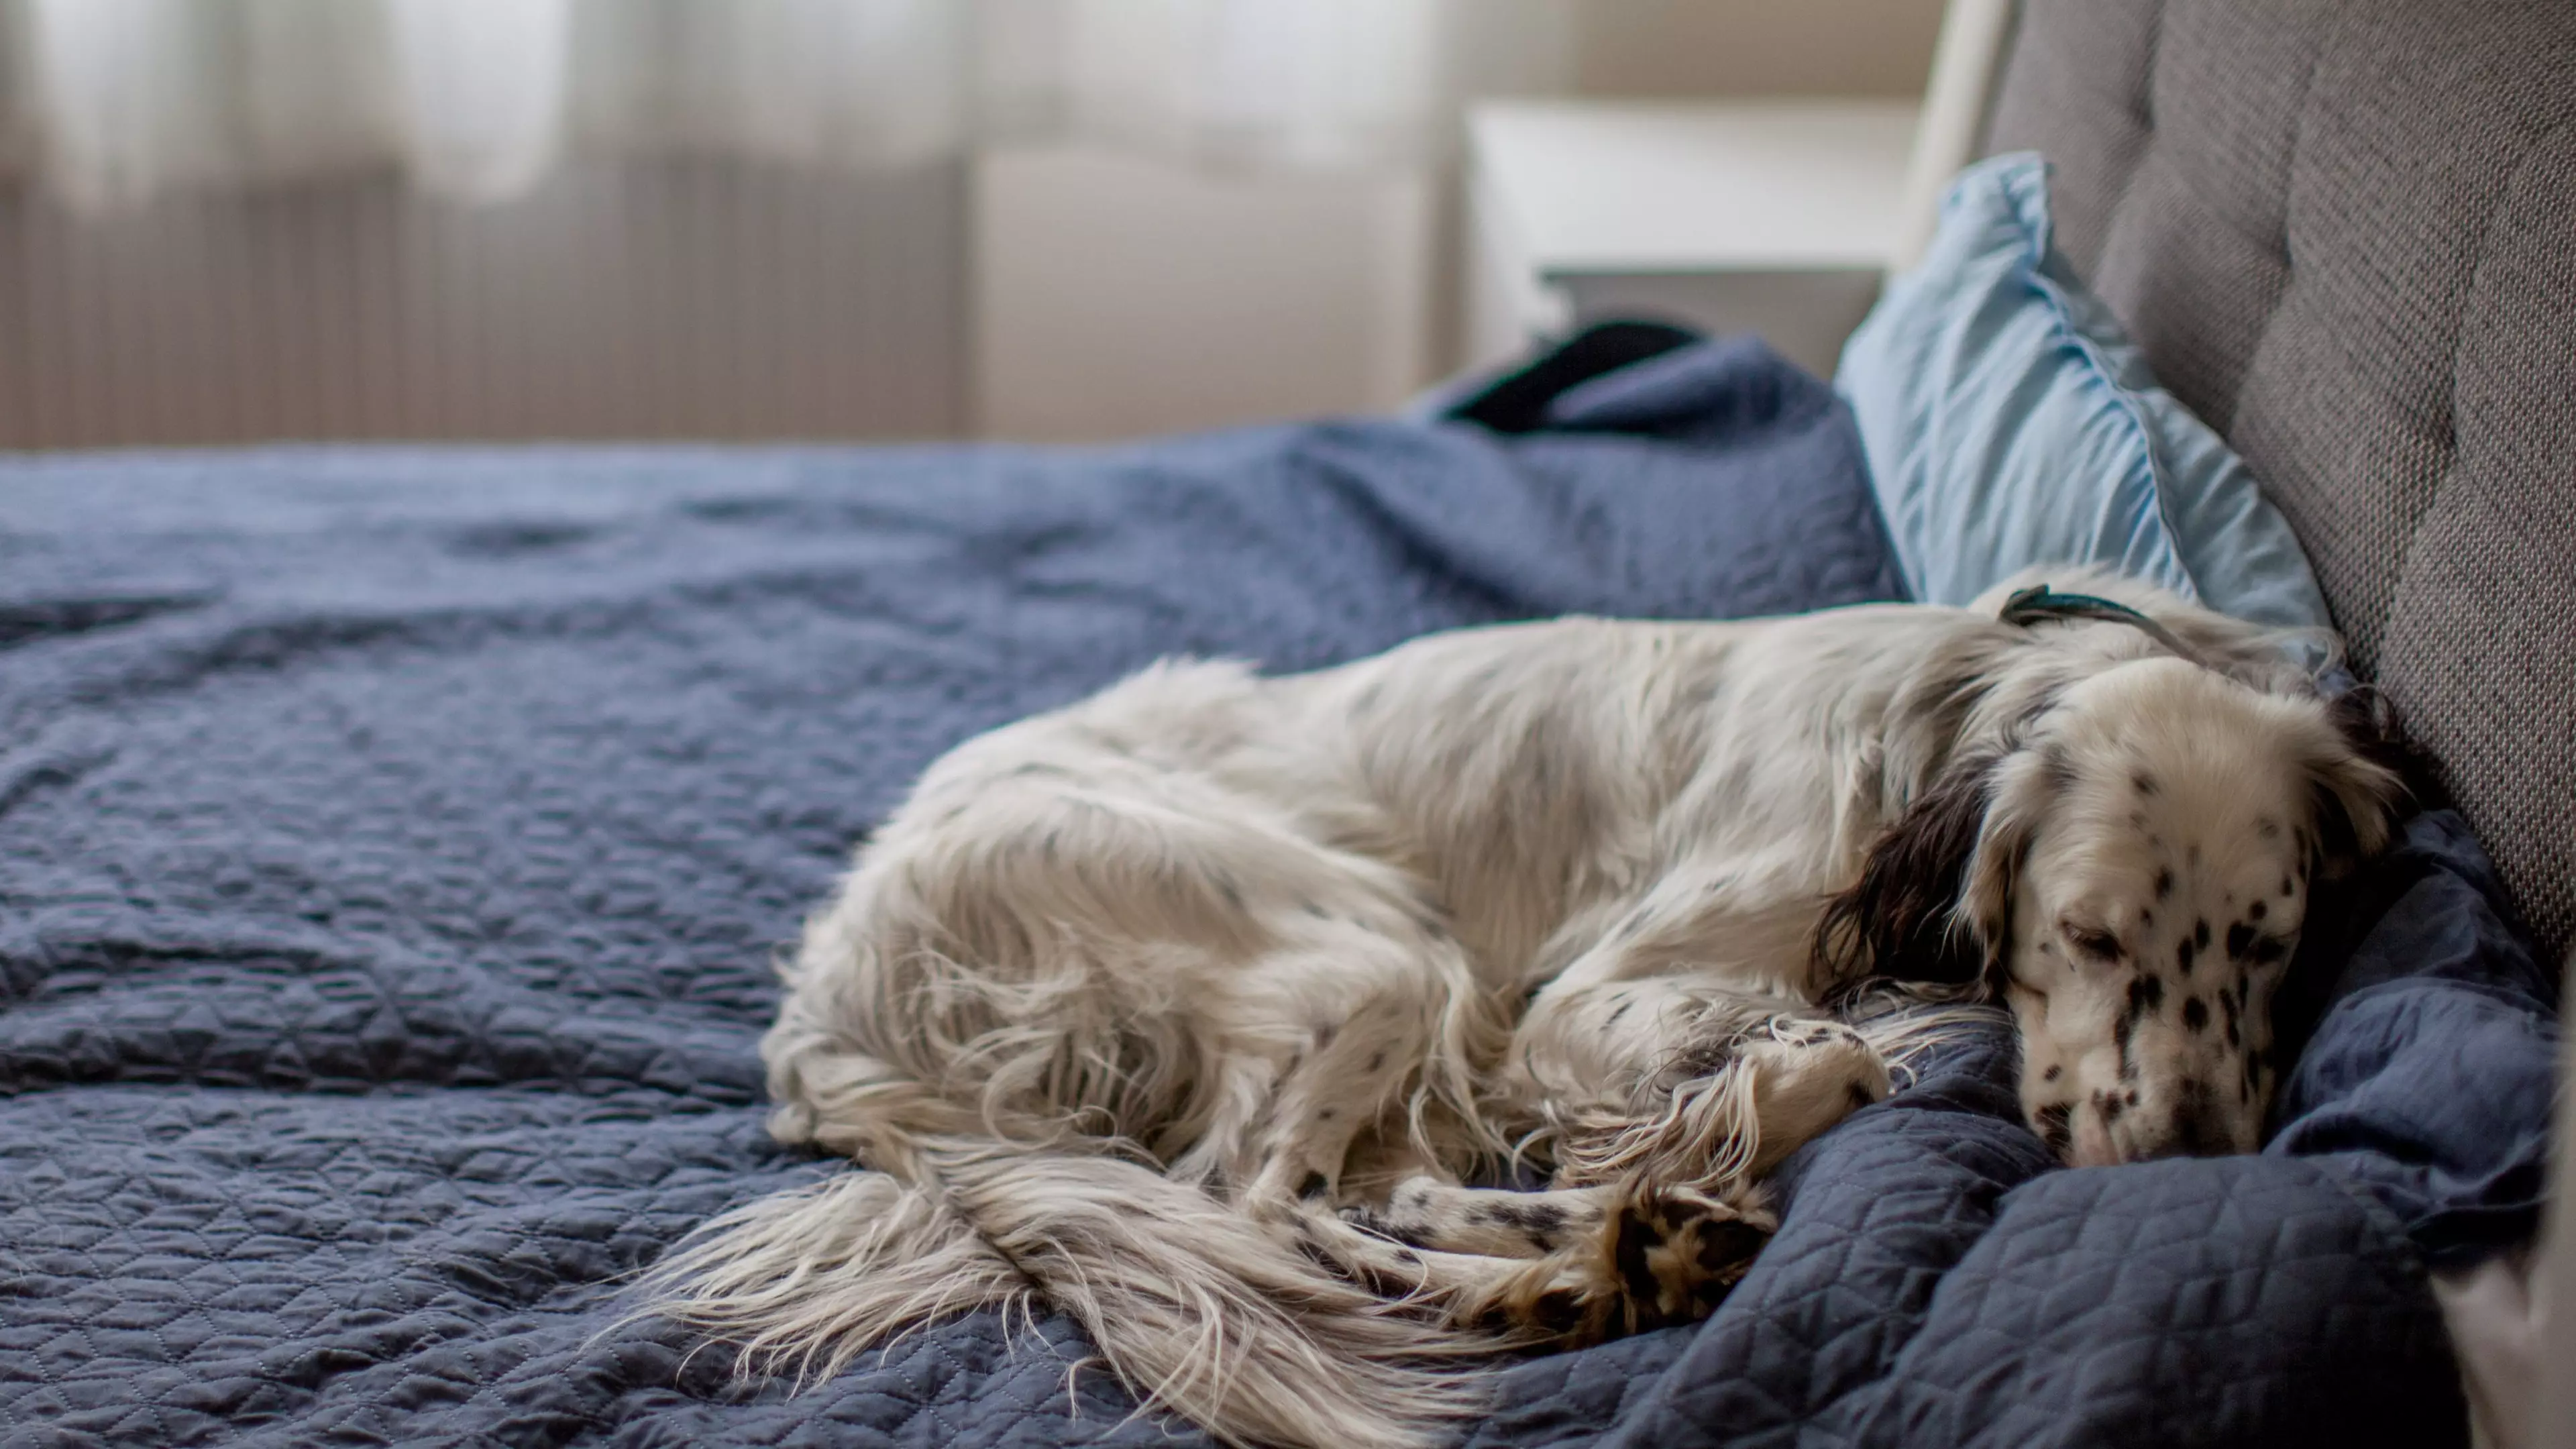 Sleeping With Your Dog In Bed Can Improve Your Mental Health, Says Animal Expert